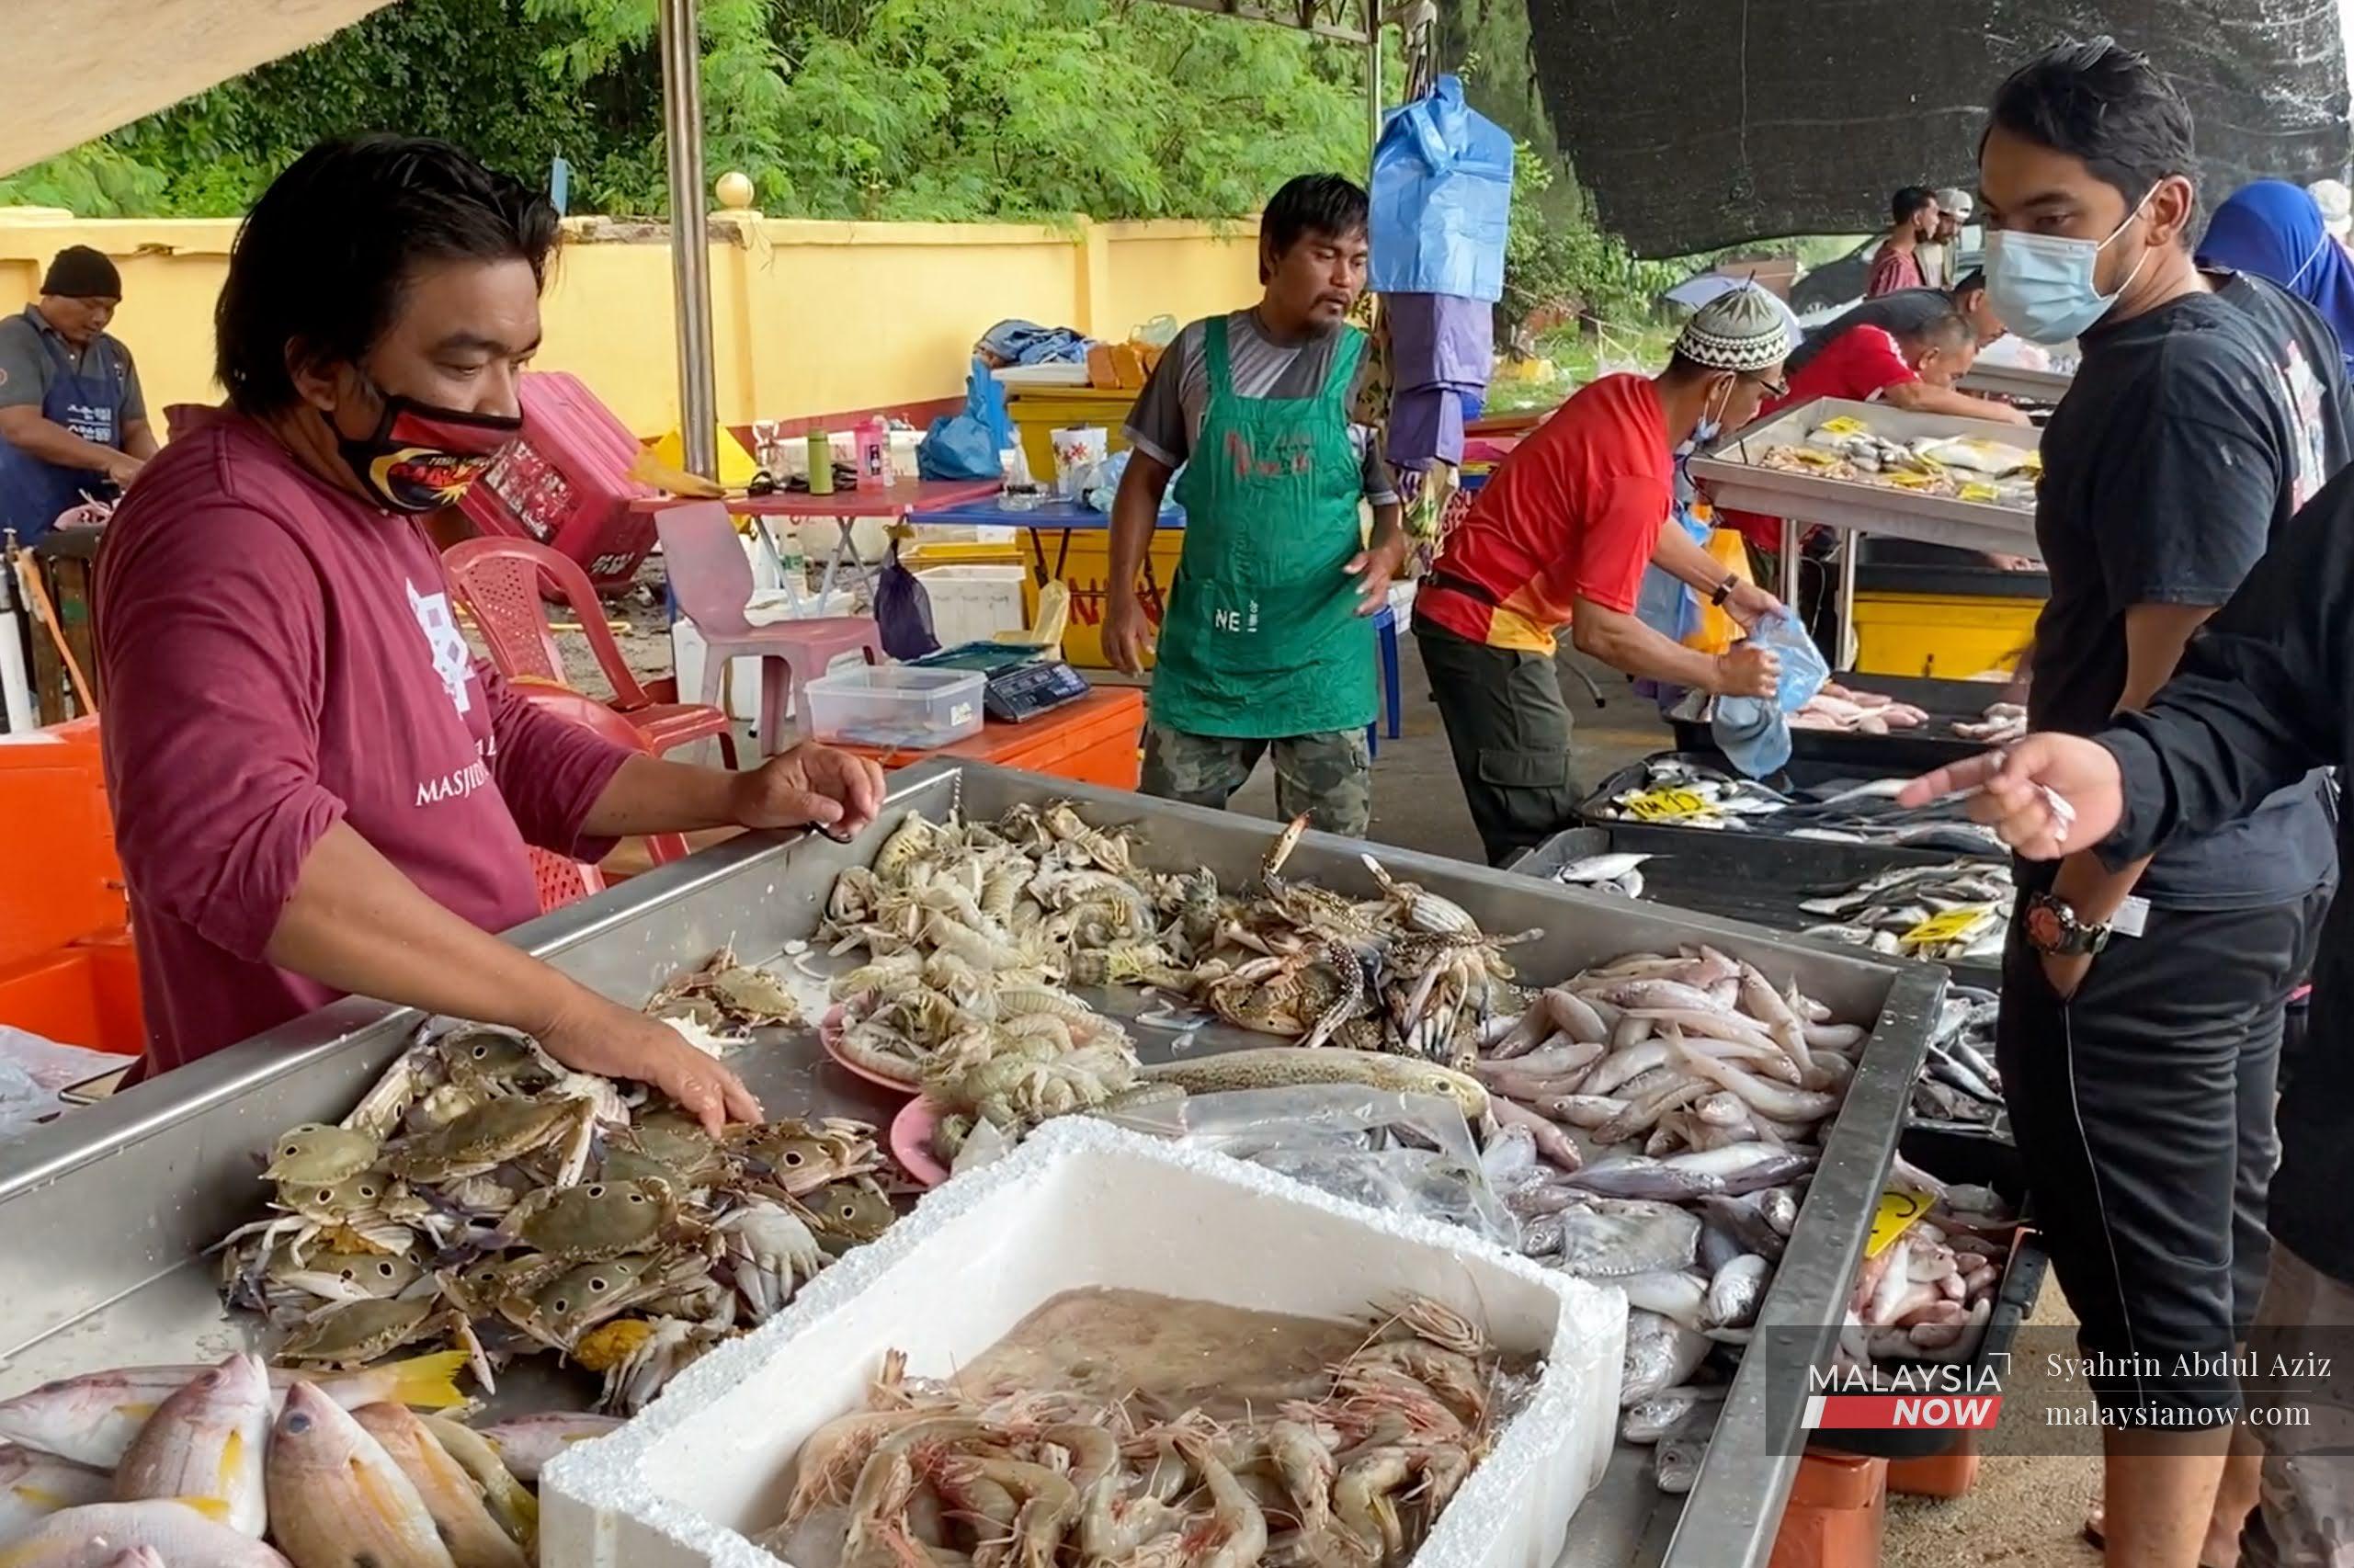 Fishermen display their catch for customers at the Chendering market in Kuala Terengganu. Malaysia's dwindling fish population could pose serious concerns for the sustainability of seafood in the country.